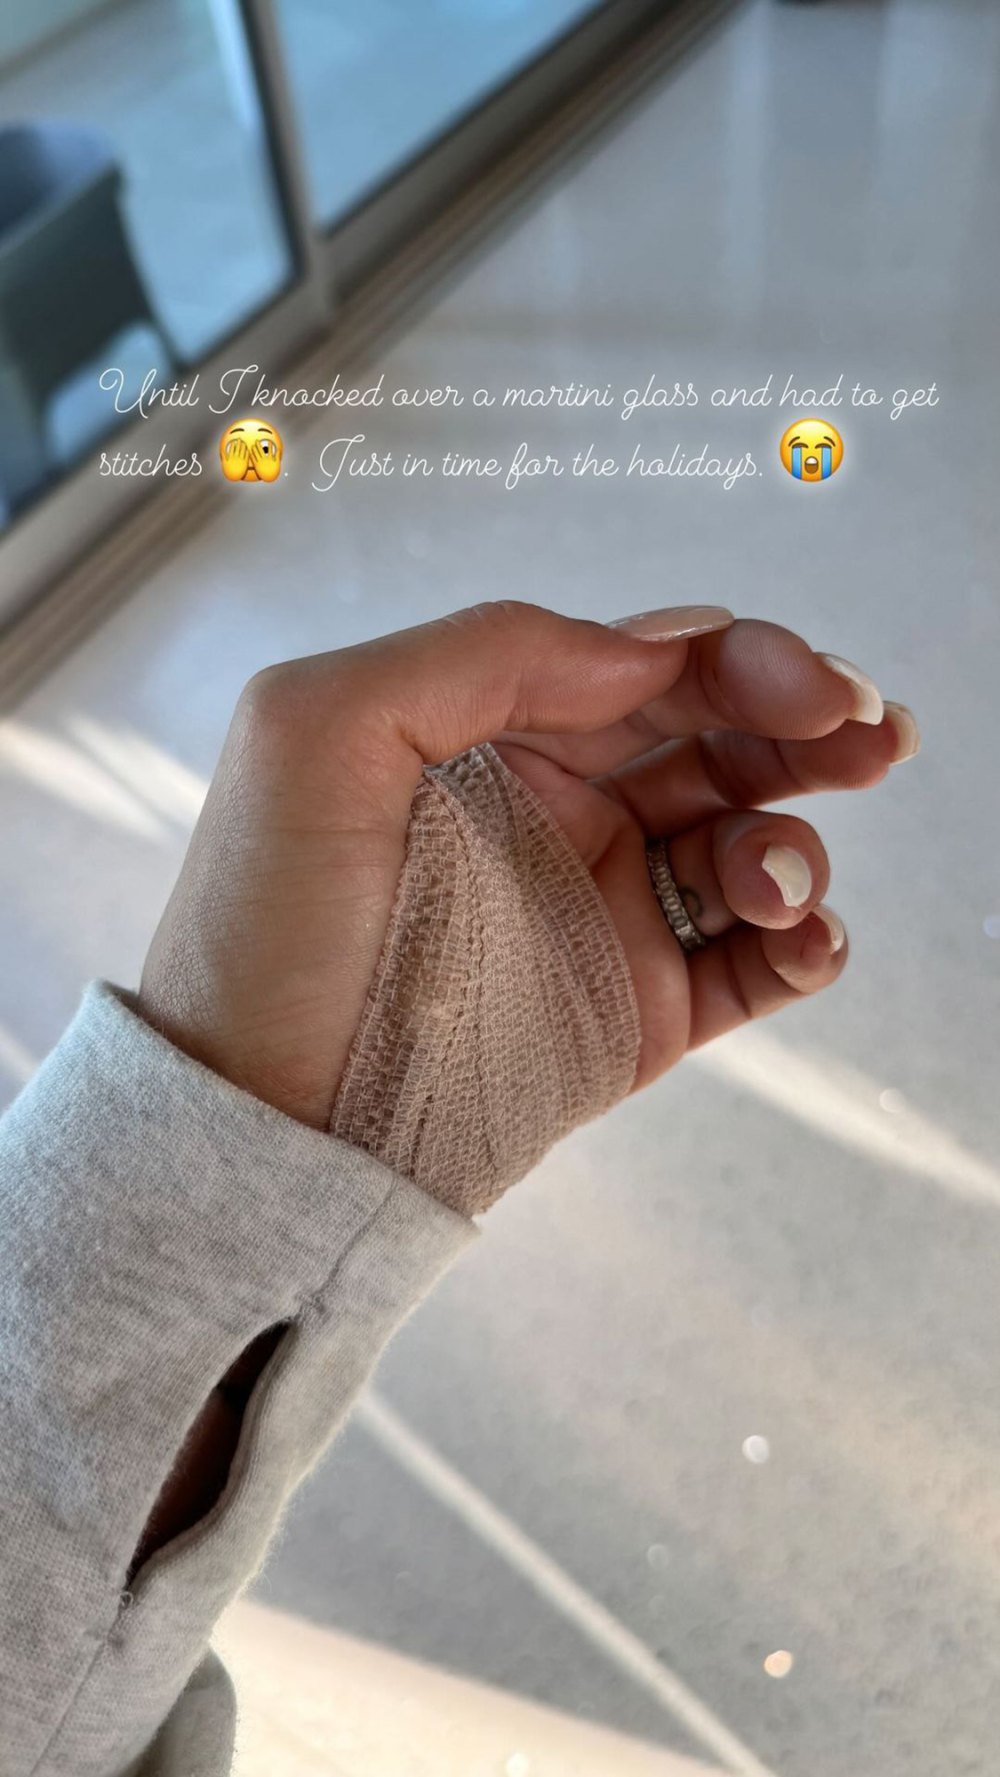 HGTV Christina Hall Gets Stitches After Slicing Hand Open During Fun Night